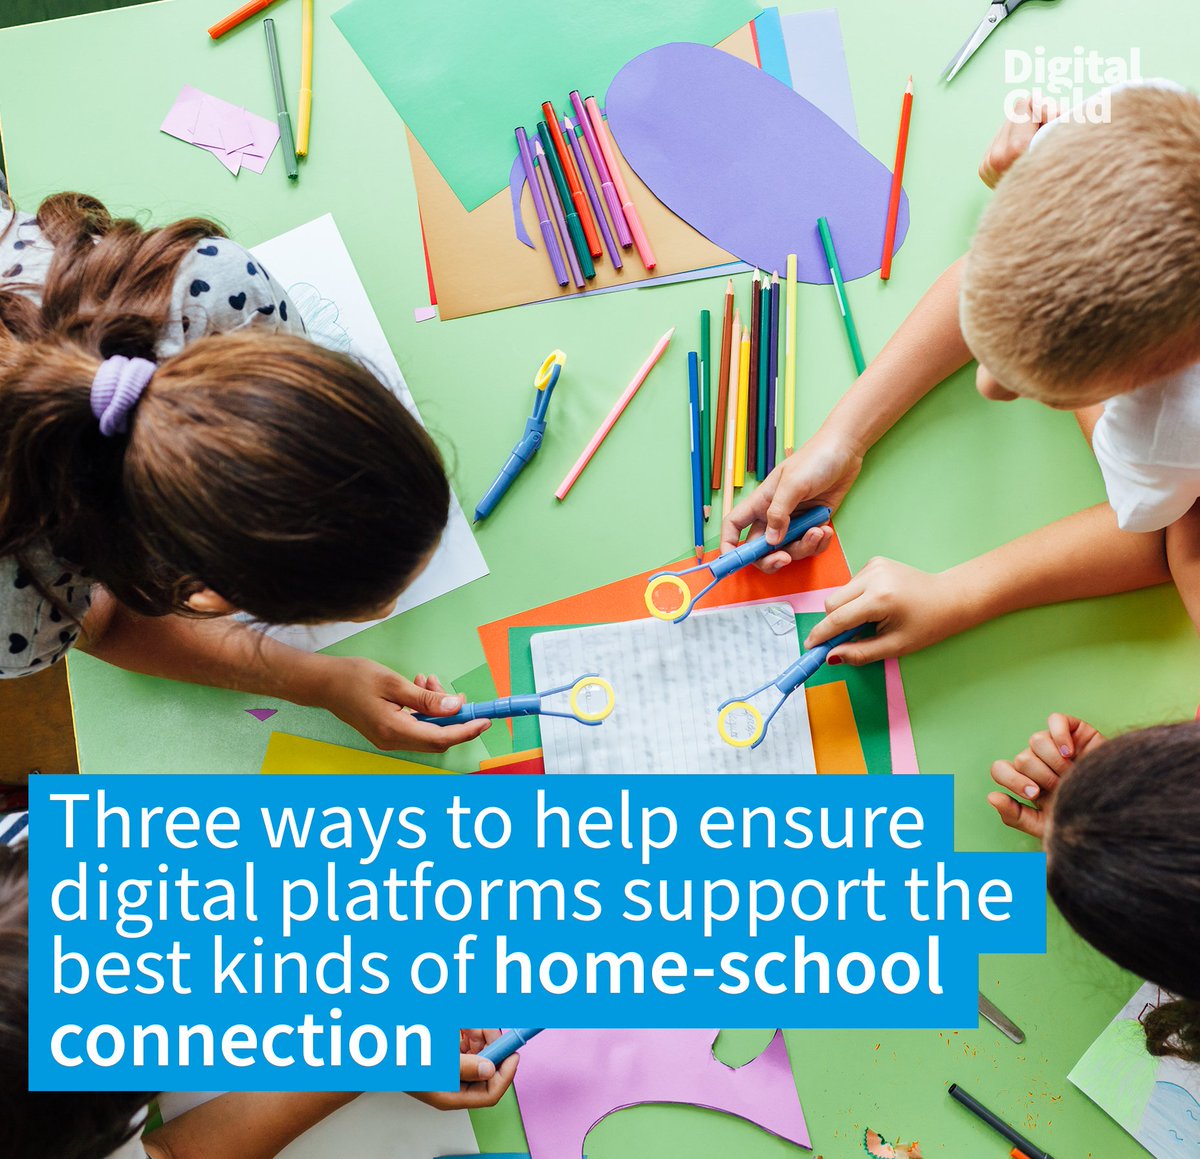 Digital platforms enable extended communication between educators and families, creating benefits and challenges for schools, services, teachers, early years educators, parents and children.

#earlyeducation #data #DataPrivacy #digitaltech